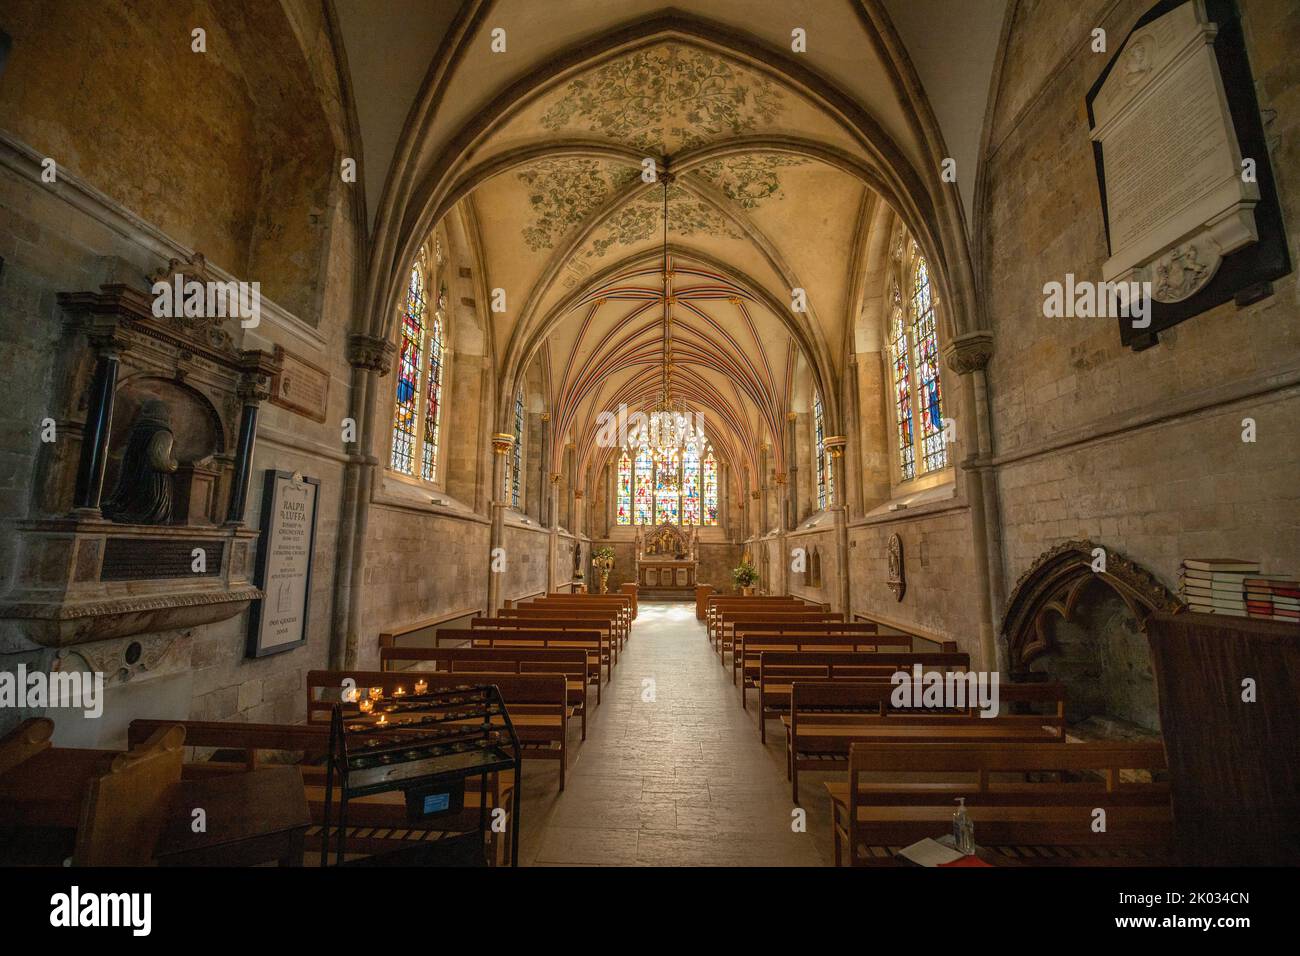 The interior look of the Chichester Cathedral with high arches, United Kingdom. Stock Photo